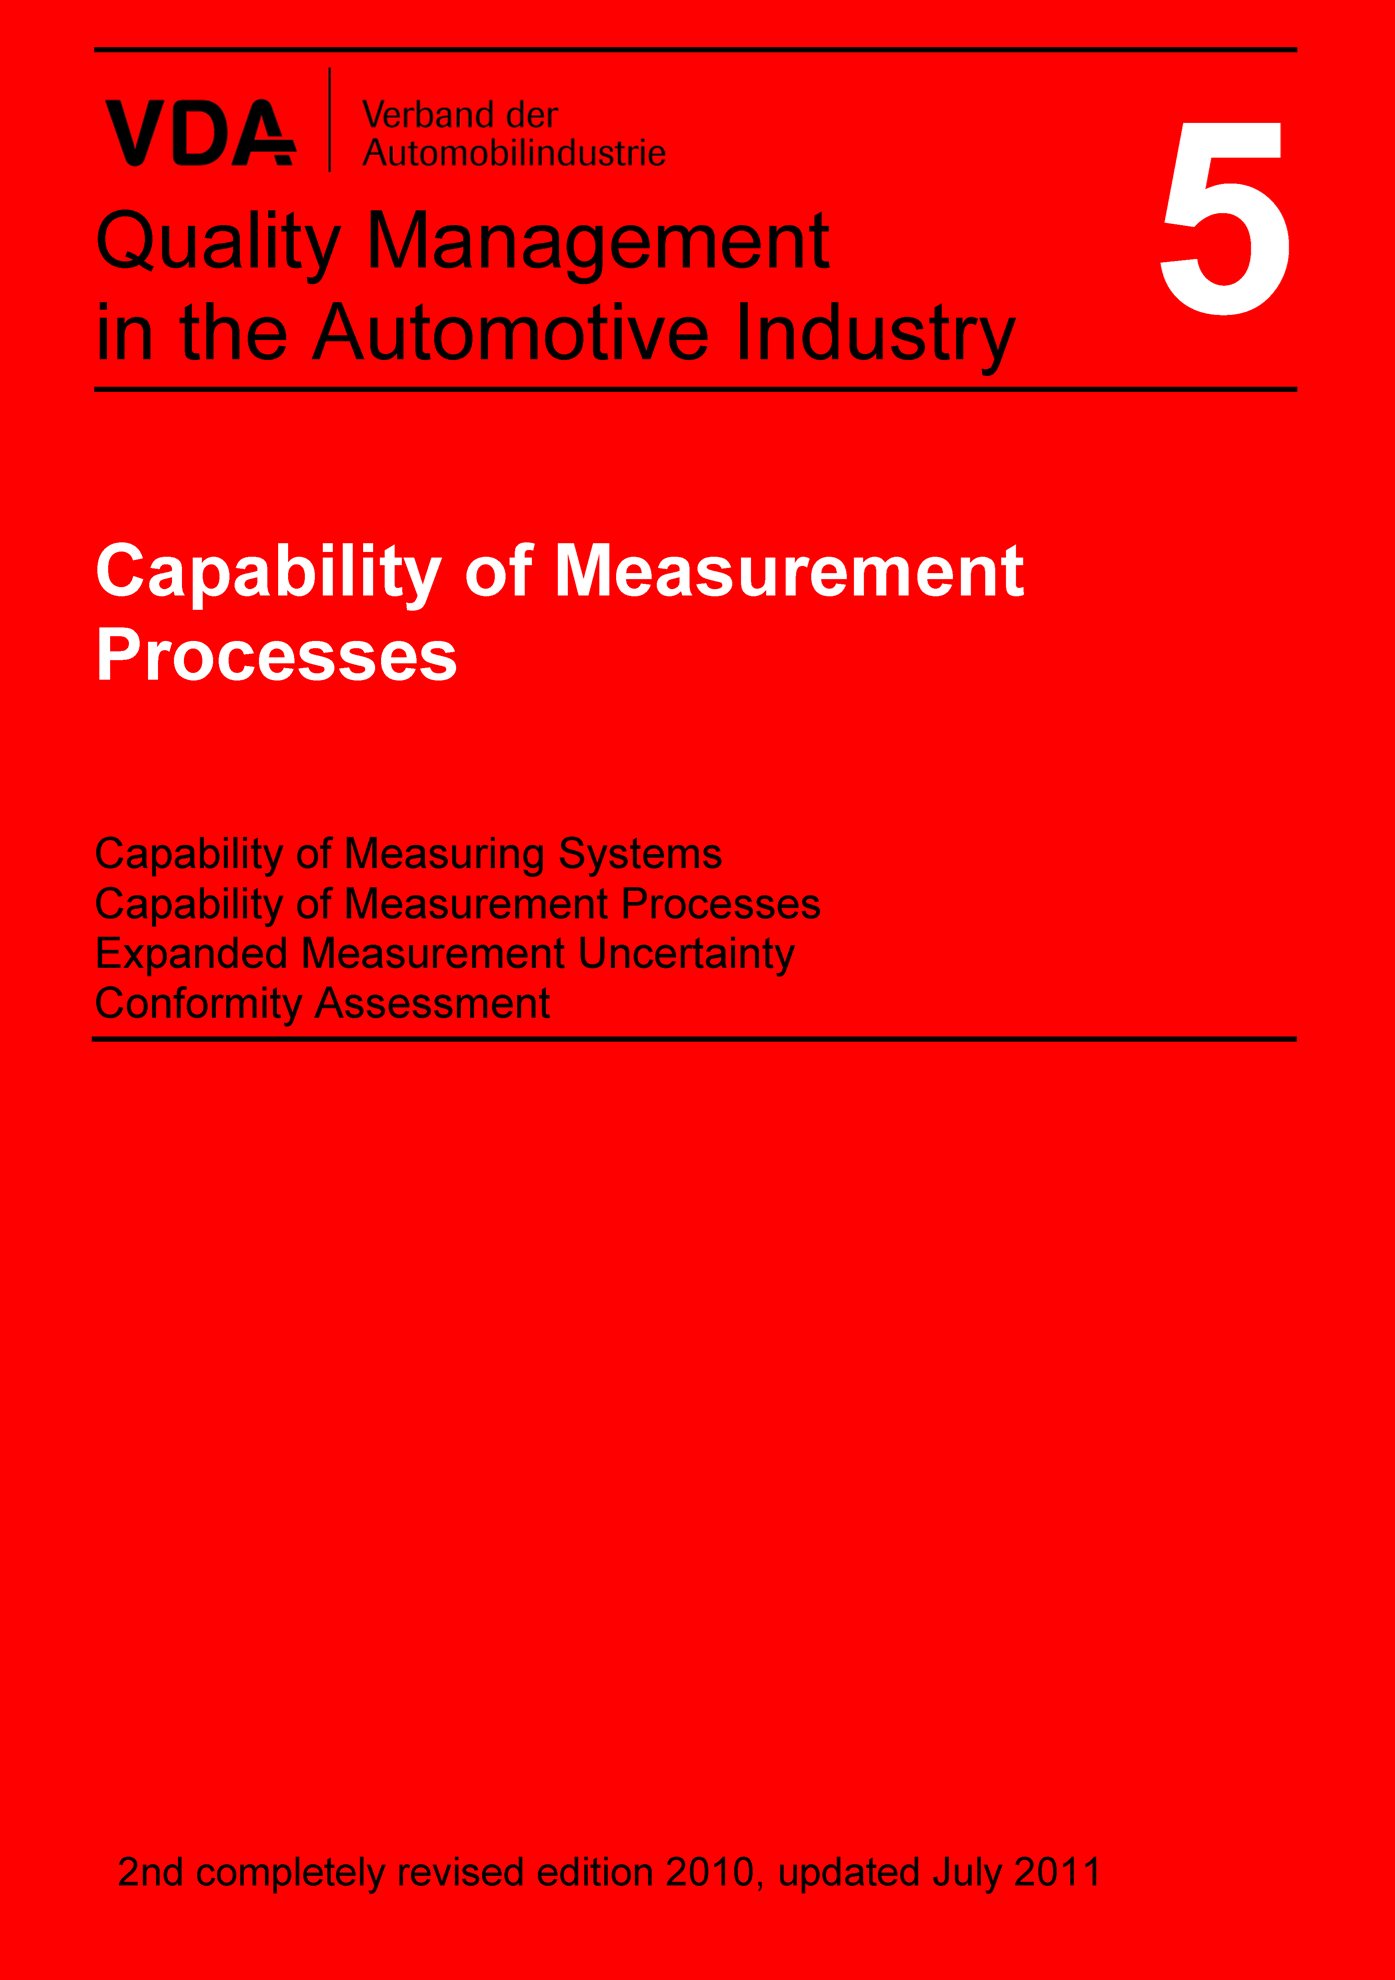 VDA Volume 5 Capability of Measurement Processes Capability of Measuring Systems 2nd completely revised edition 2010, updated July 2011 1.1.2011